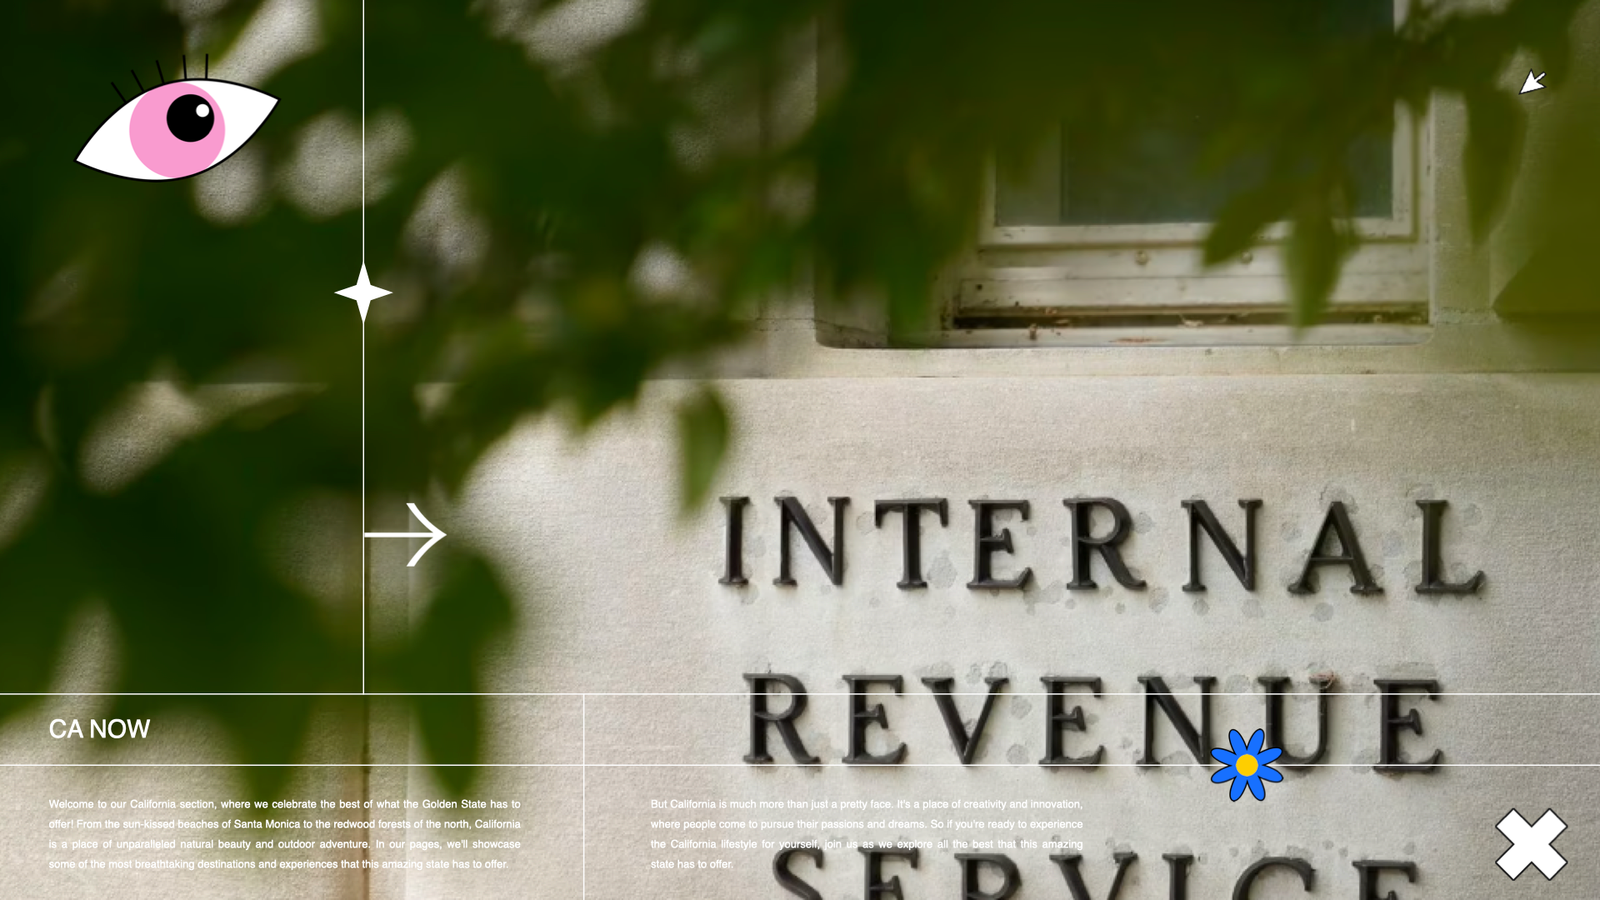 Us Irs May Develop Free E File Tax Return System But Tax Prep Firms Oppose Pressreels